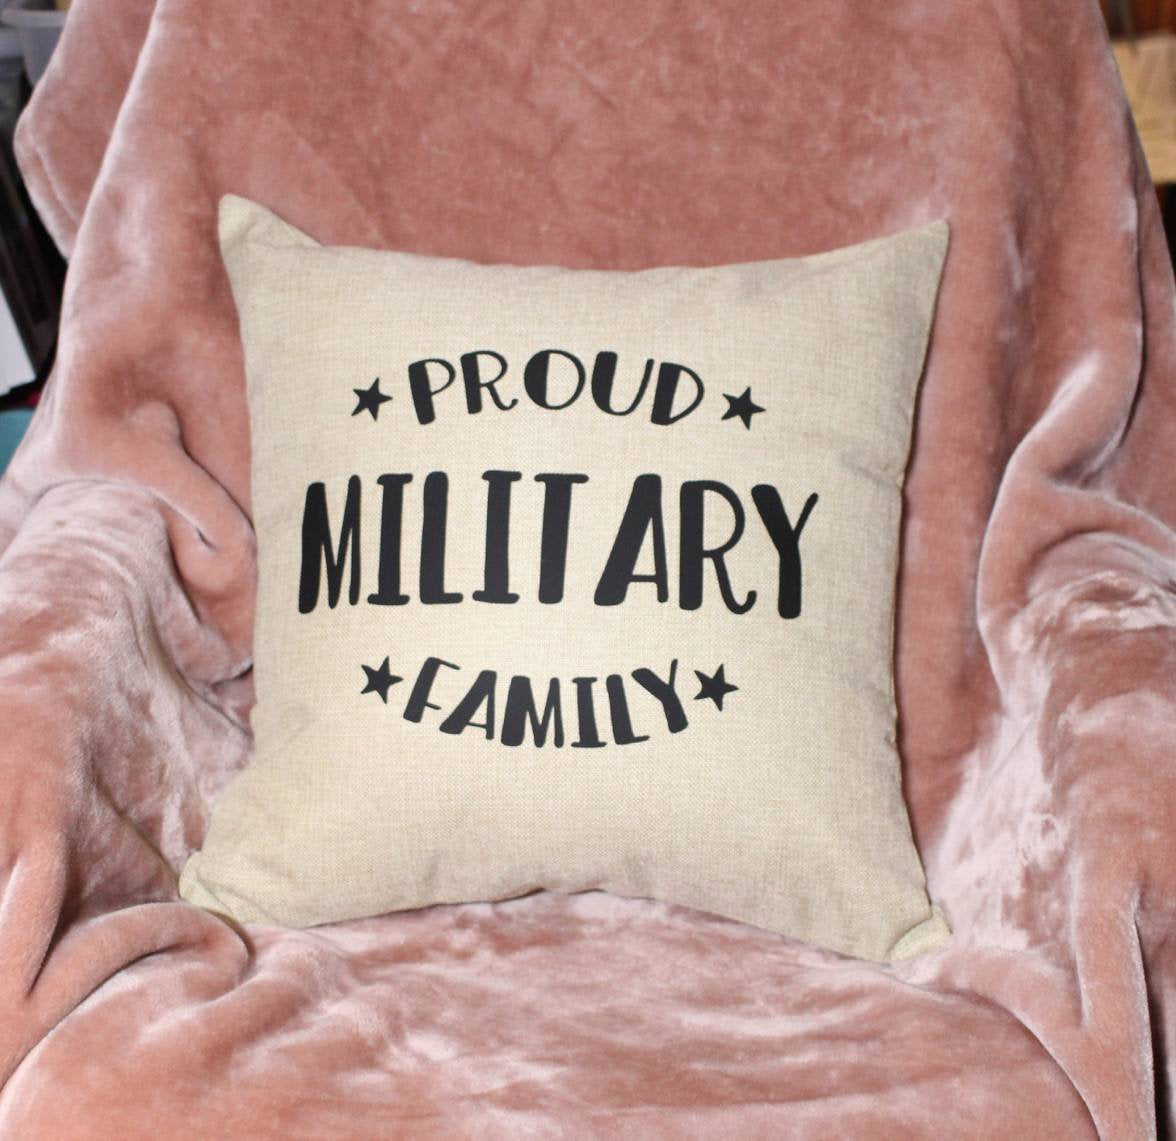 18x18" Proud Military Family Throw Pillow Cover